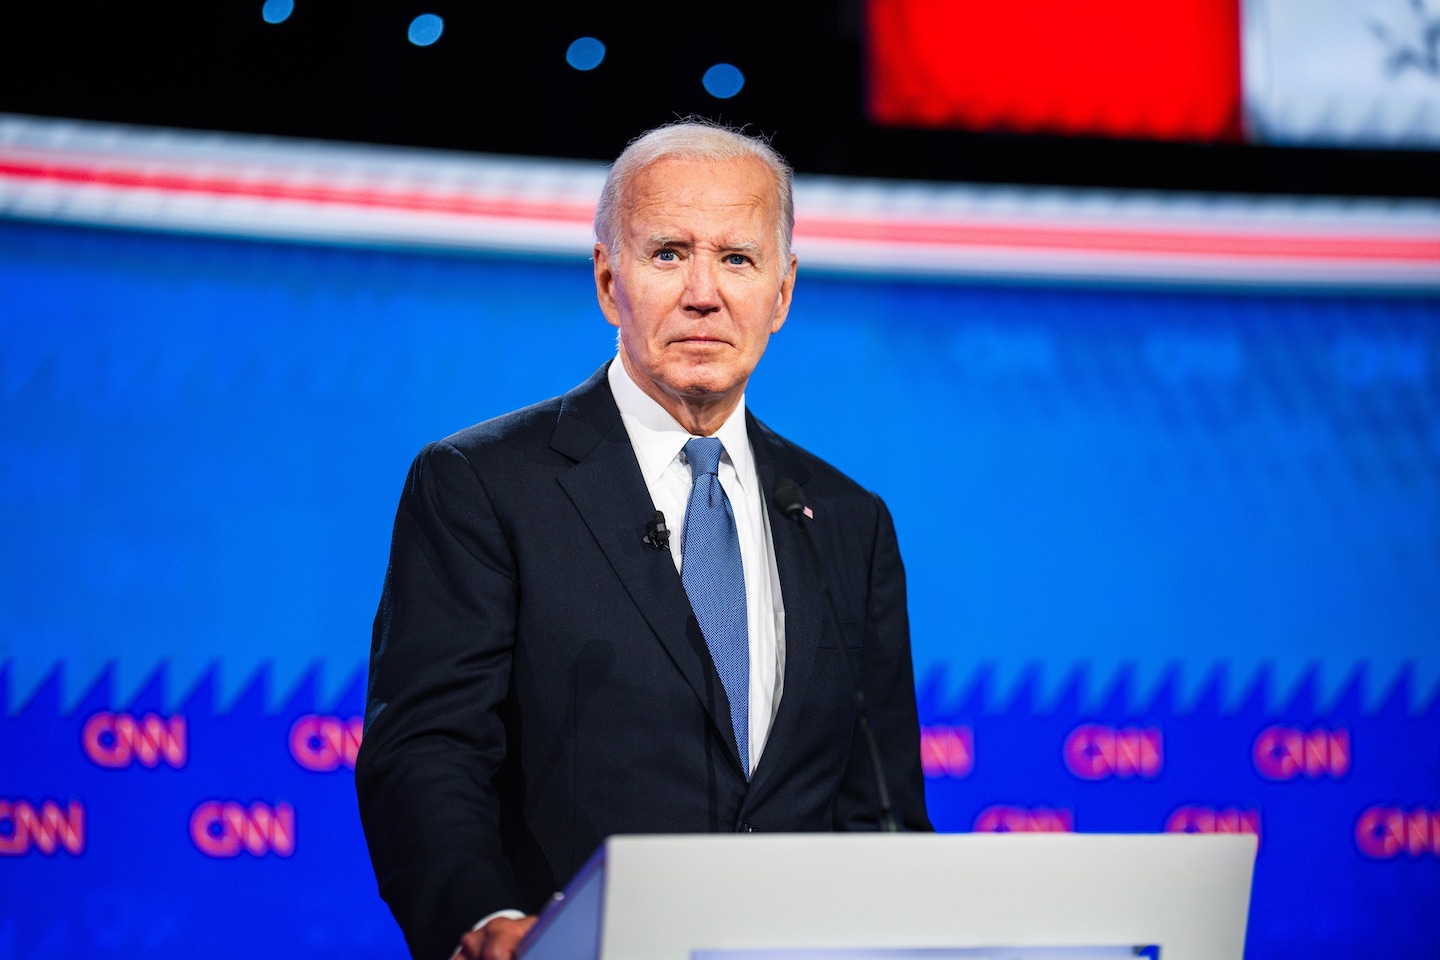 Biden needs the support of millions of Americans who don't think he can get the job done